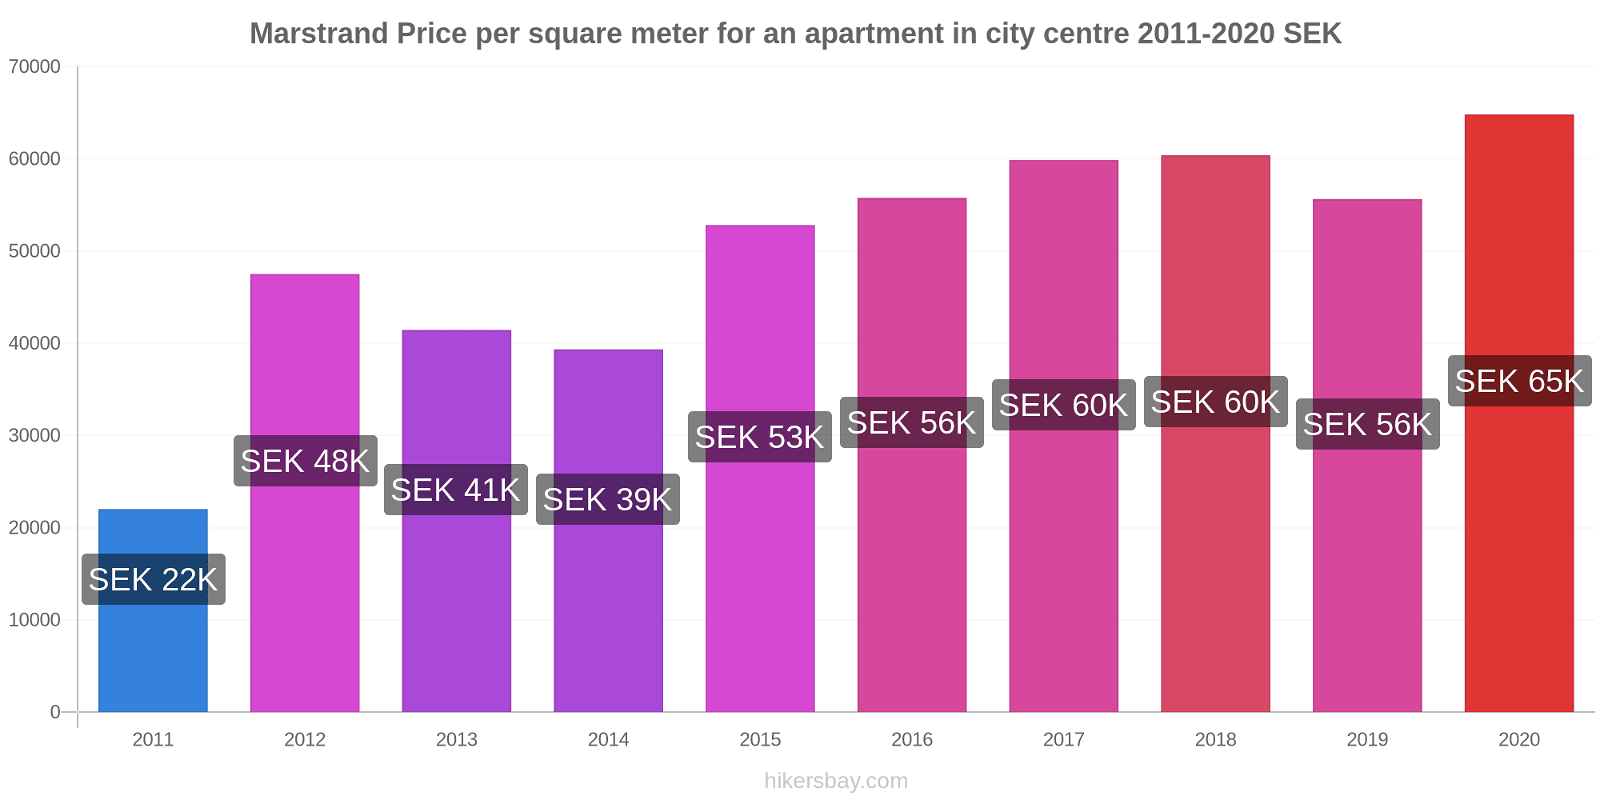 Marstrand price changes Price per square meter for an apartment in city centre hikersbay.com